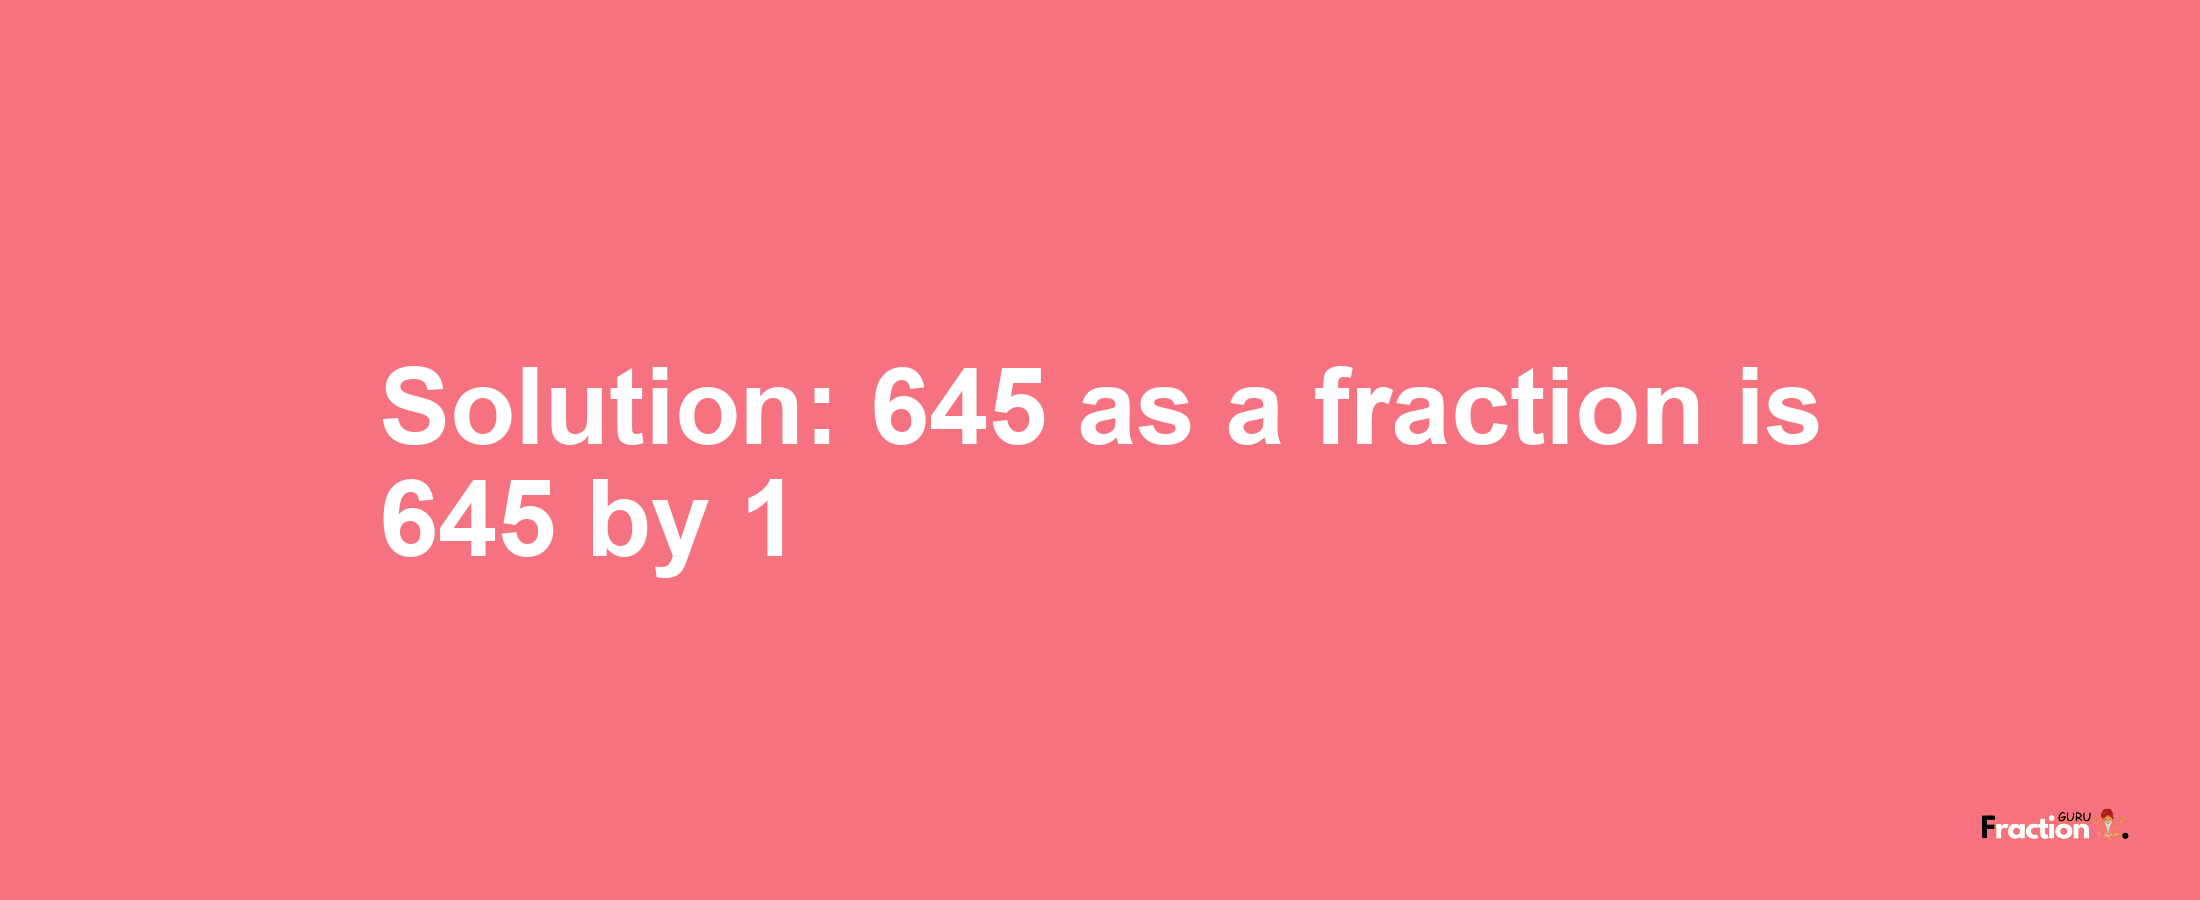 Solution:645 as a fraction is 645/1